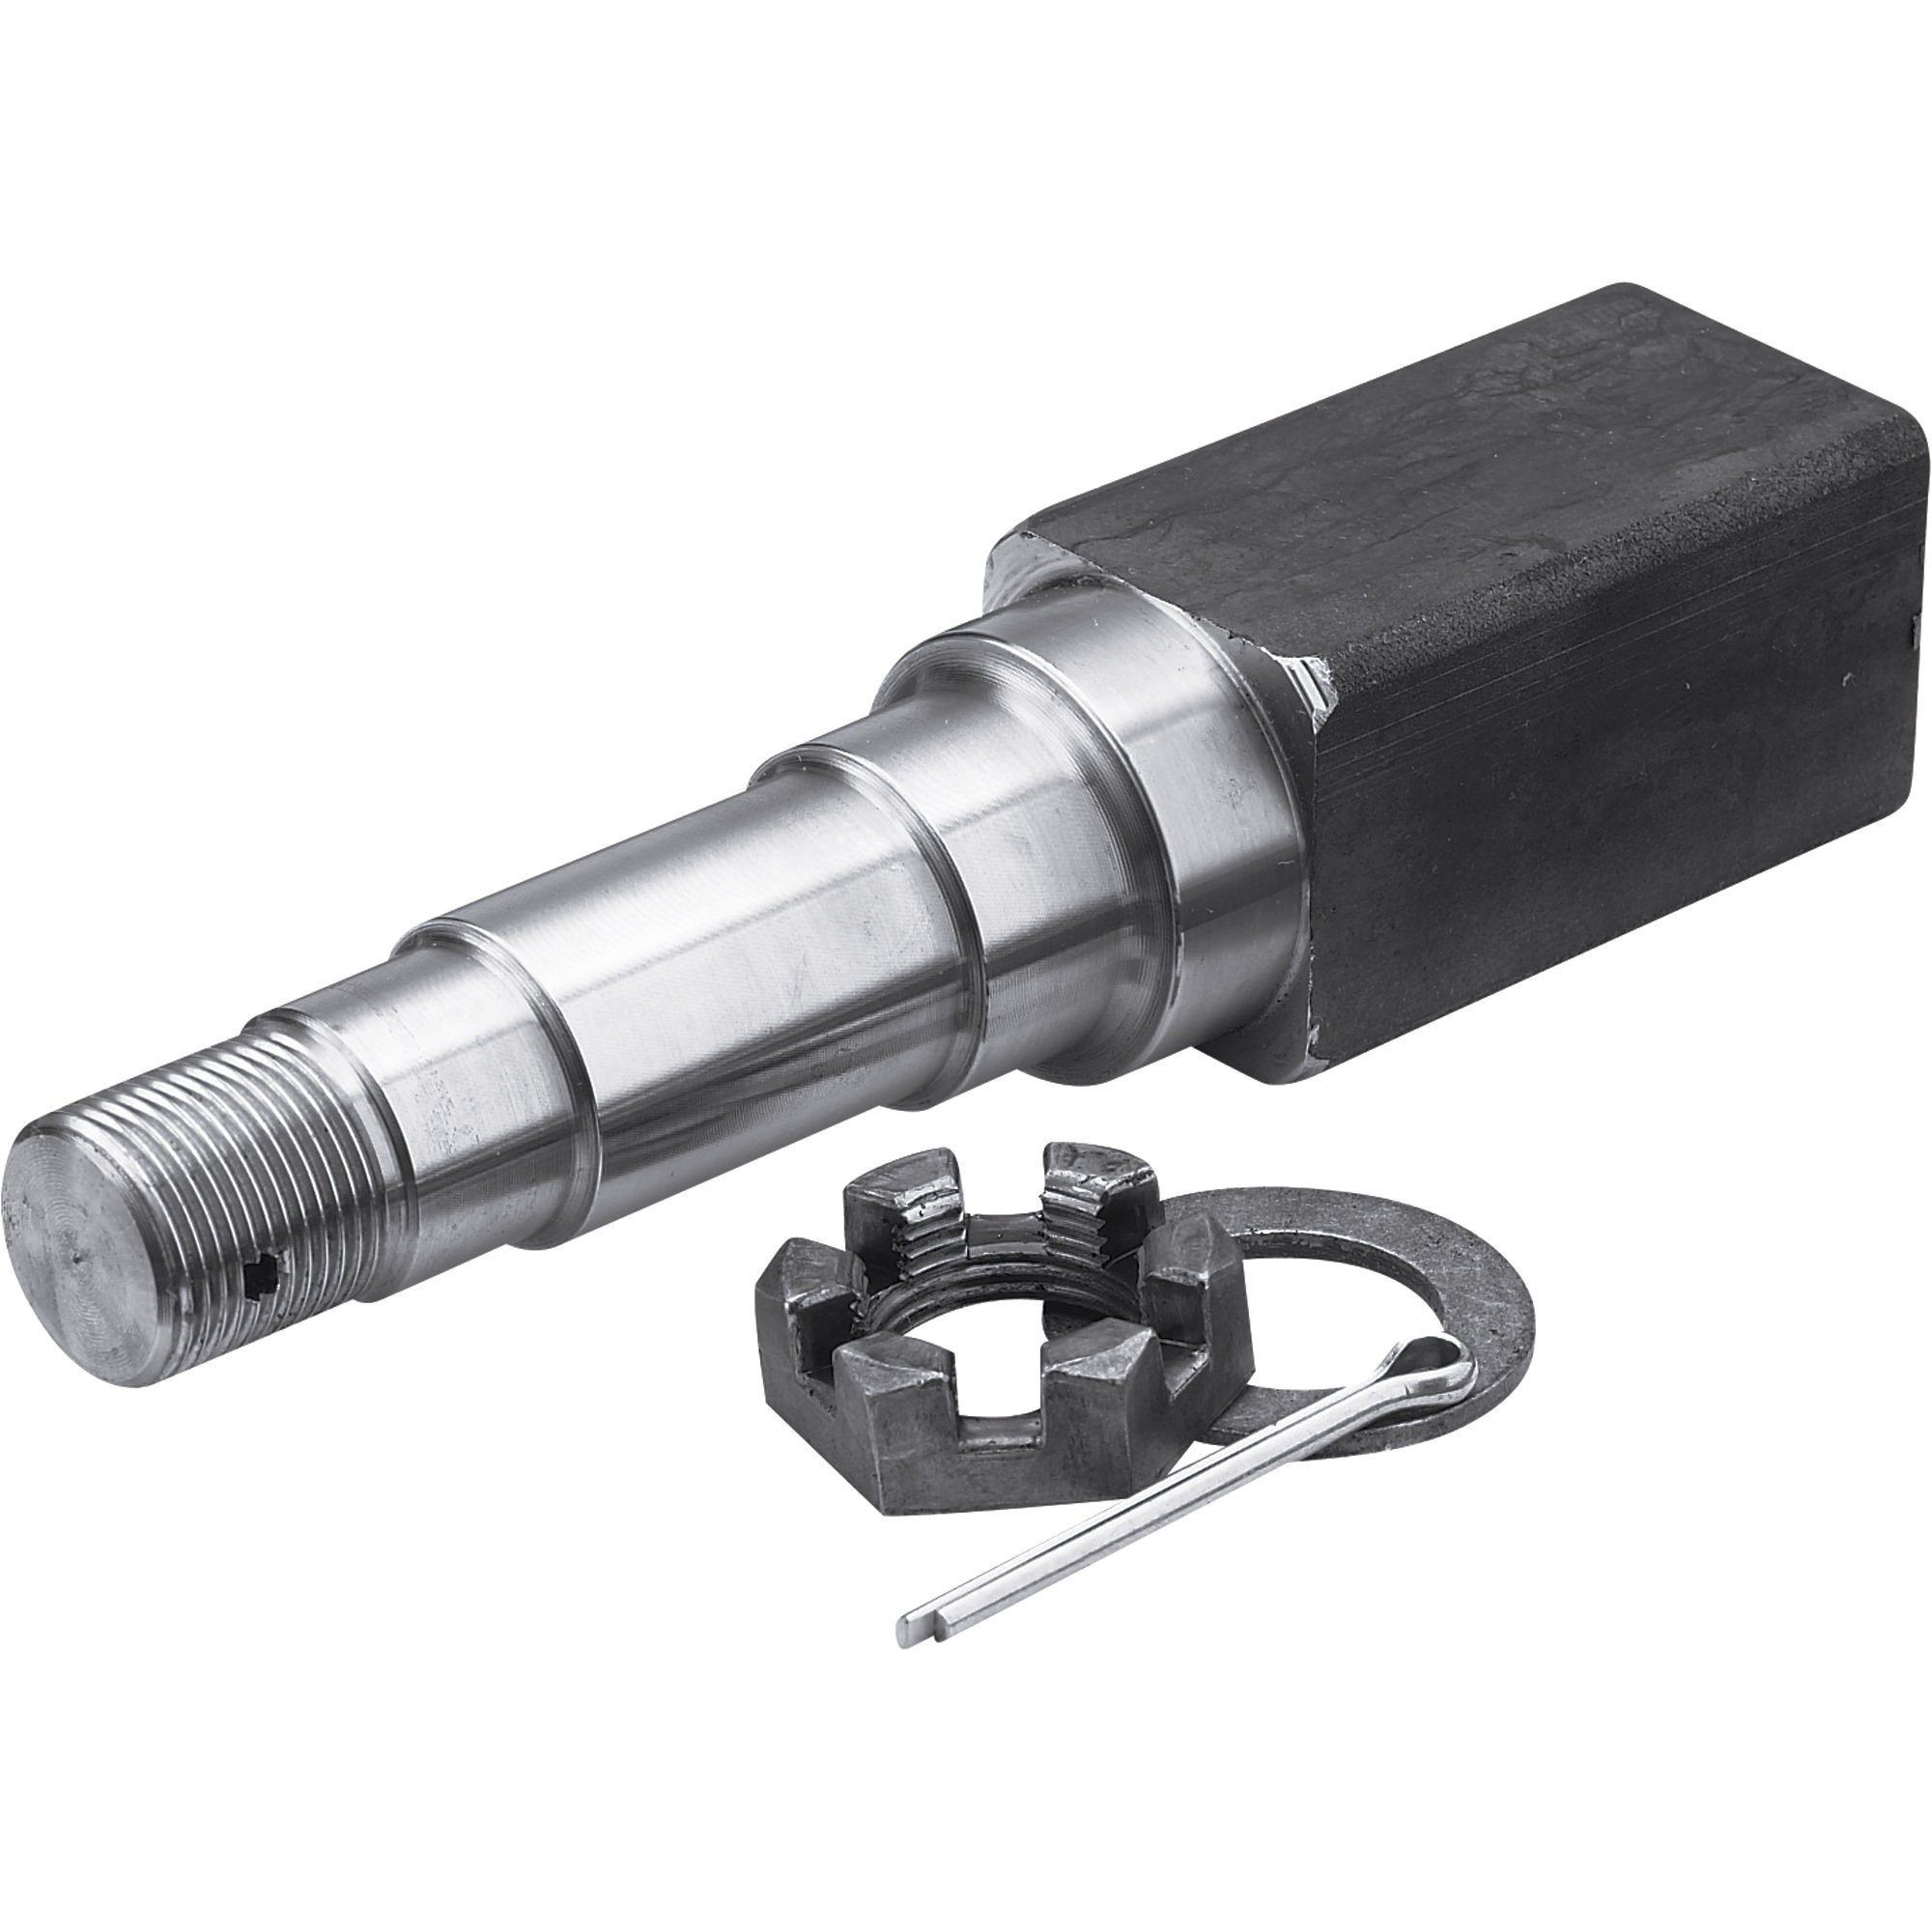 Ultra-Tow Axle Spindle — 1 3/4in. Square, 8in. Long, Single